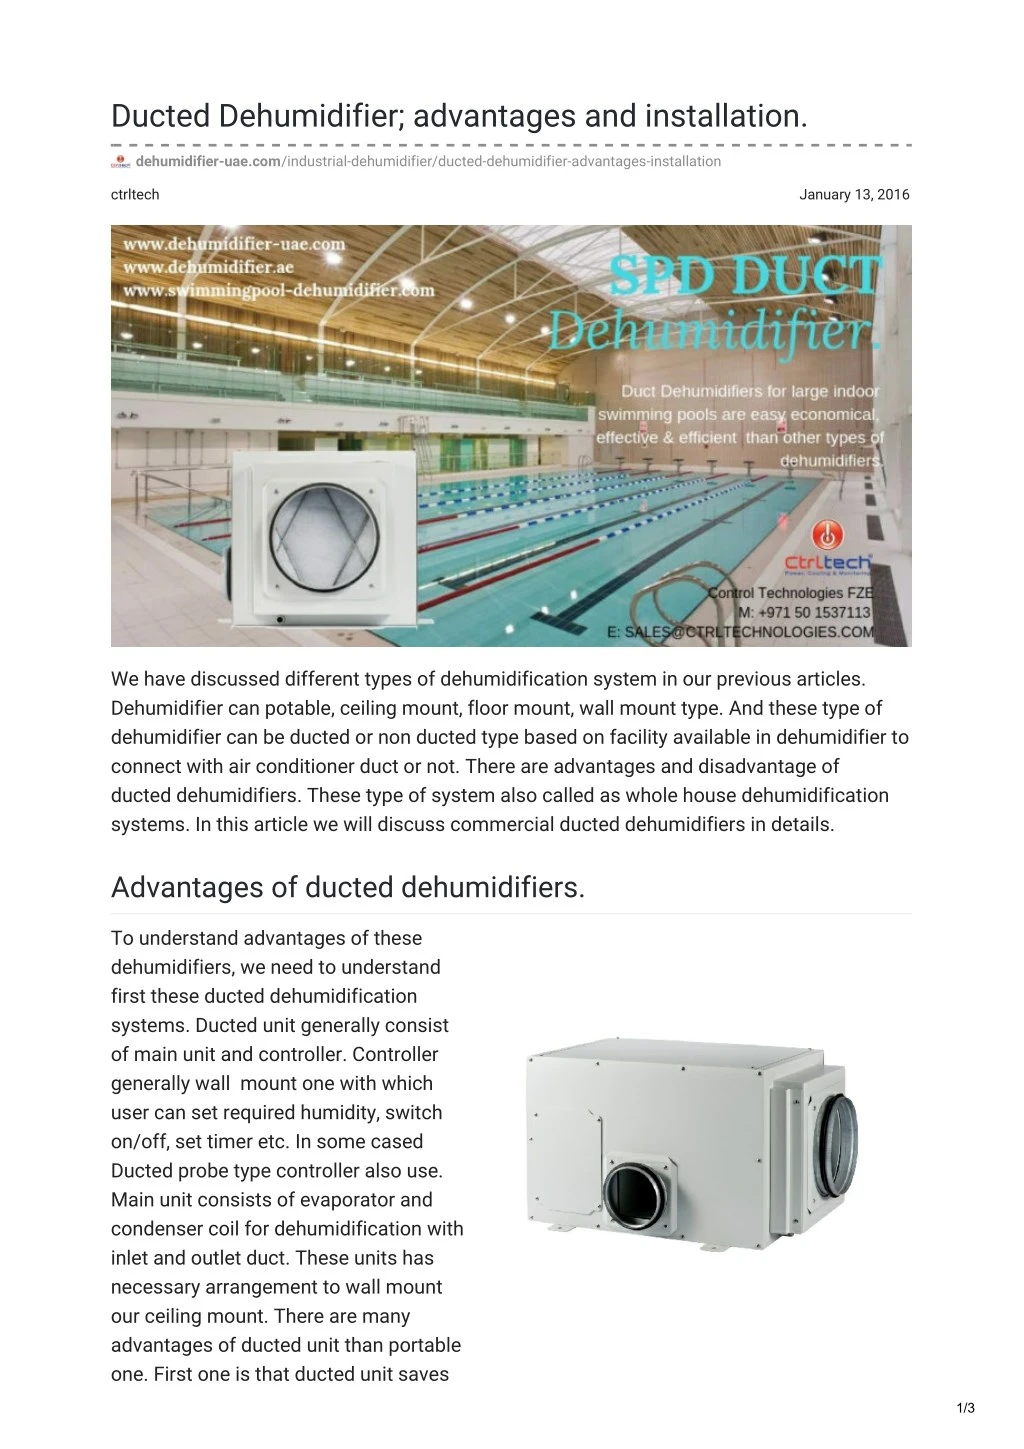 ducted dehumidifier advantages and installation